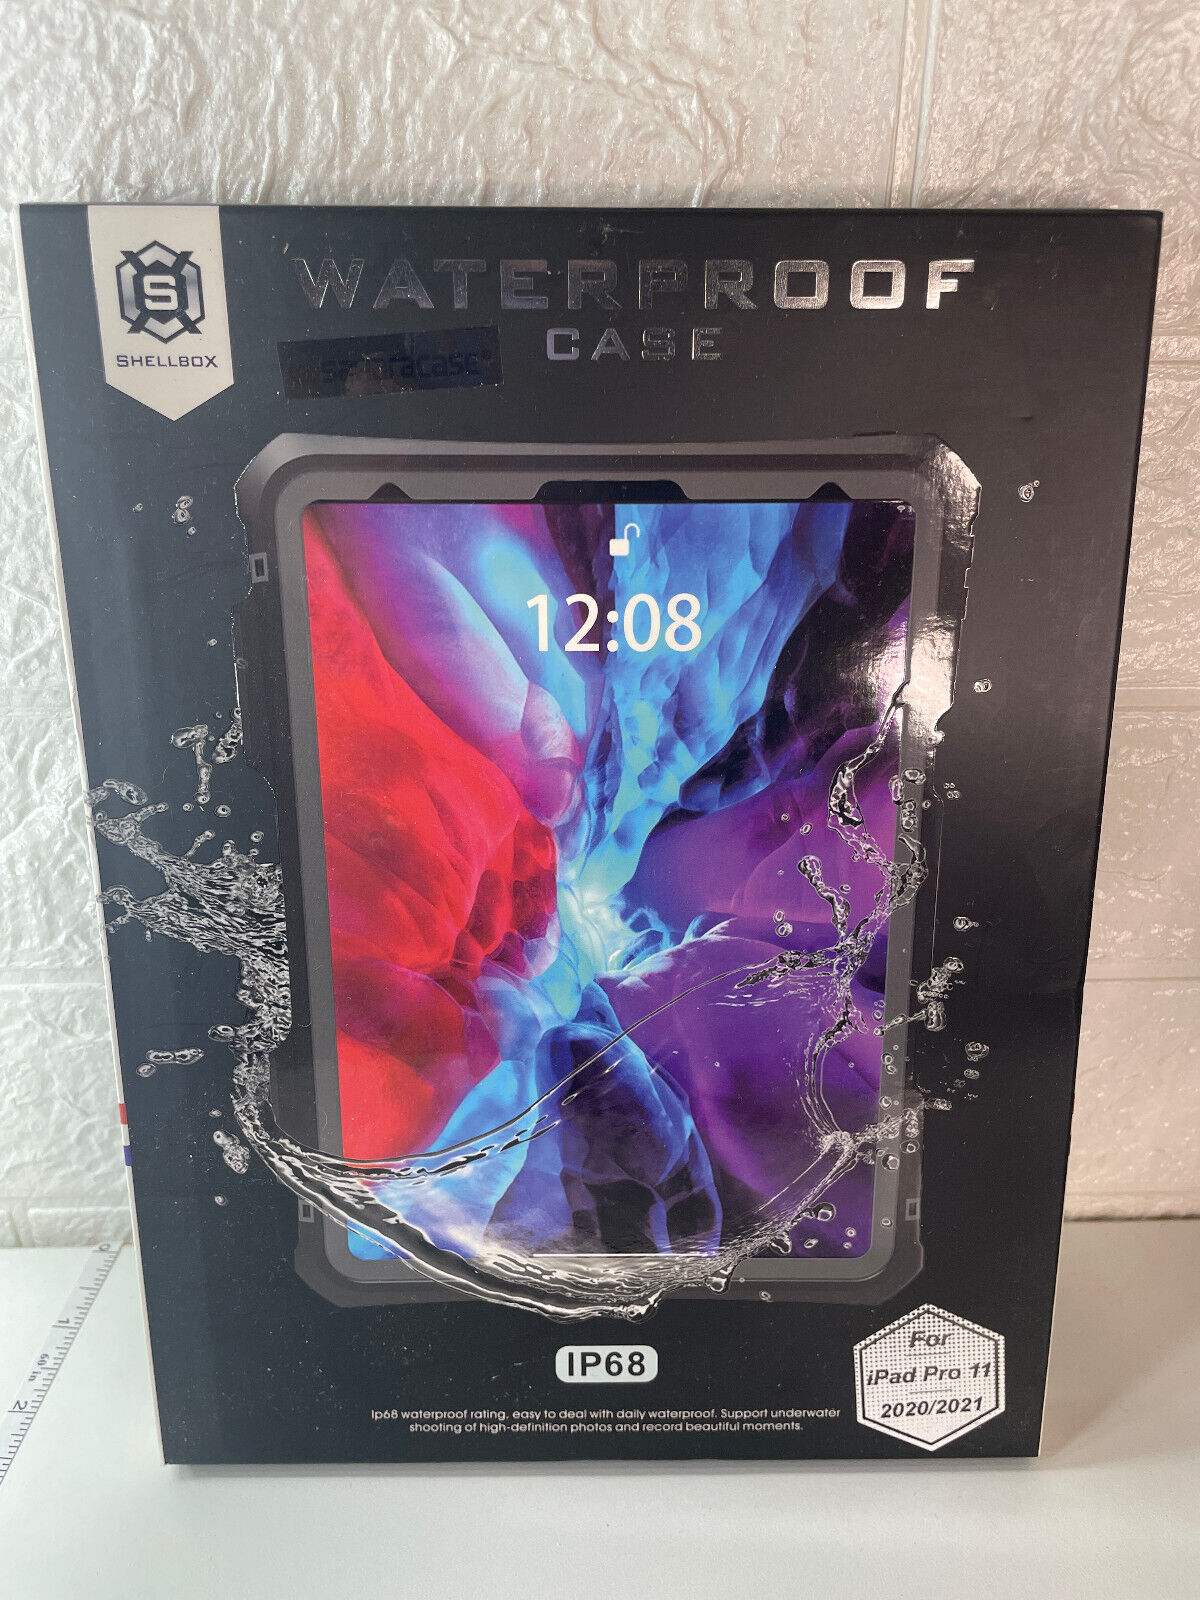 NEW IN BOX Shellbox IP68 Waterproof Case Cover for iPad Pro 11 (2020/2021)